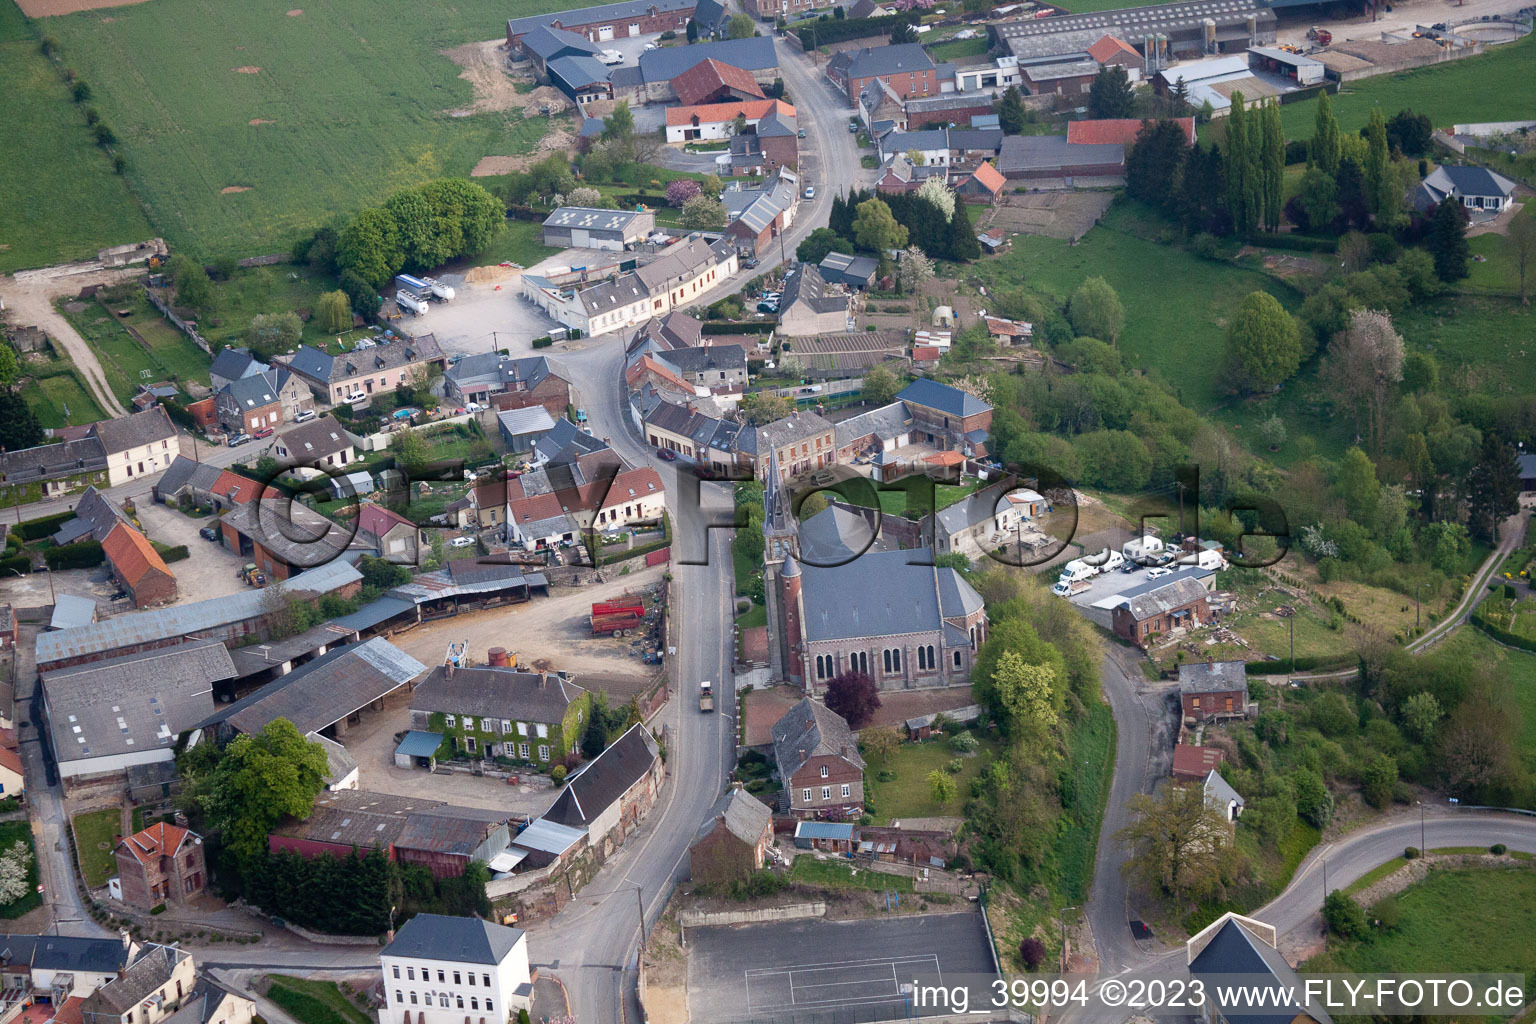 Aerial photograpy of Lesquielles-Saint-Germain in the state Aisne, France